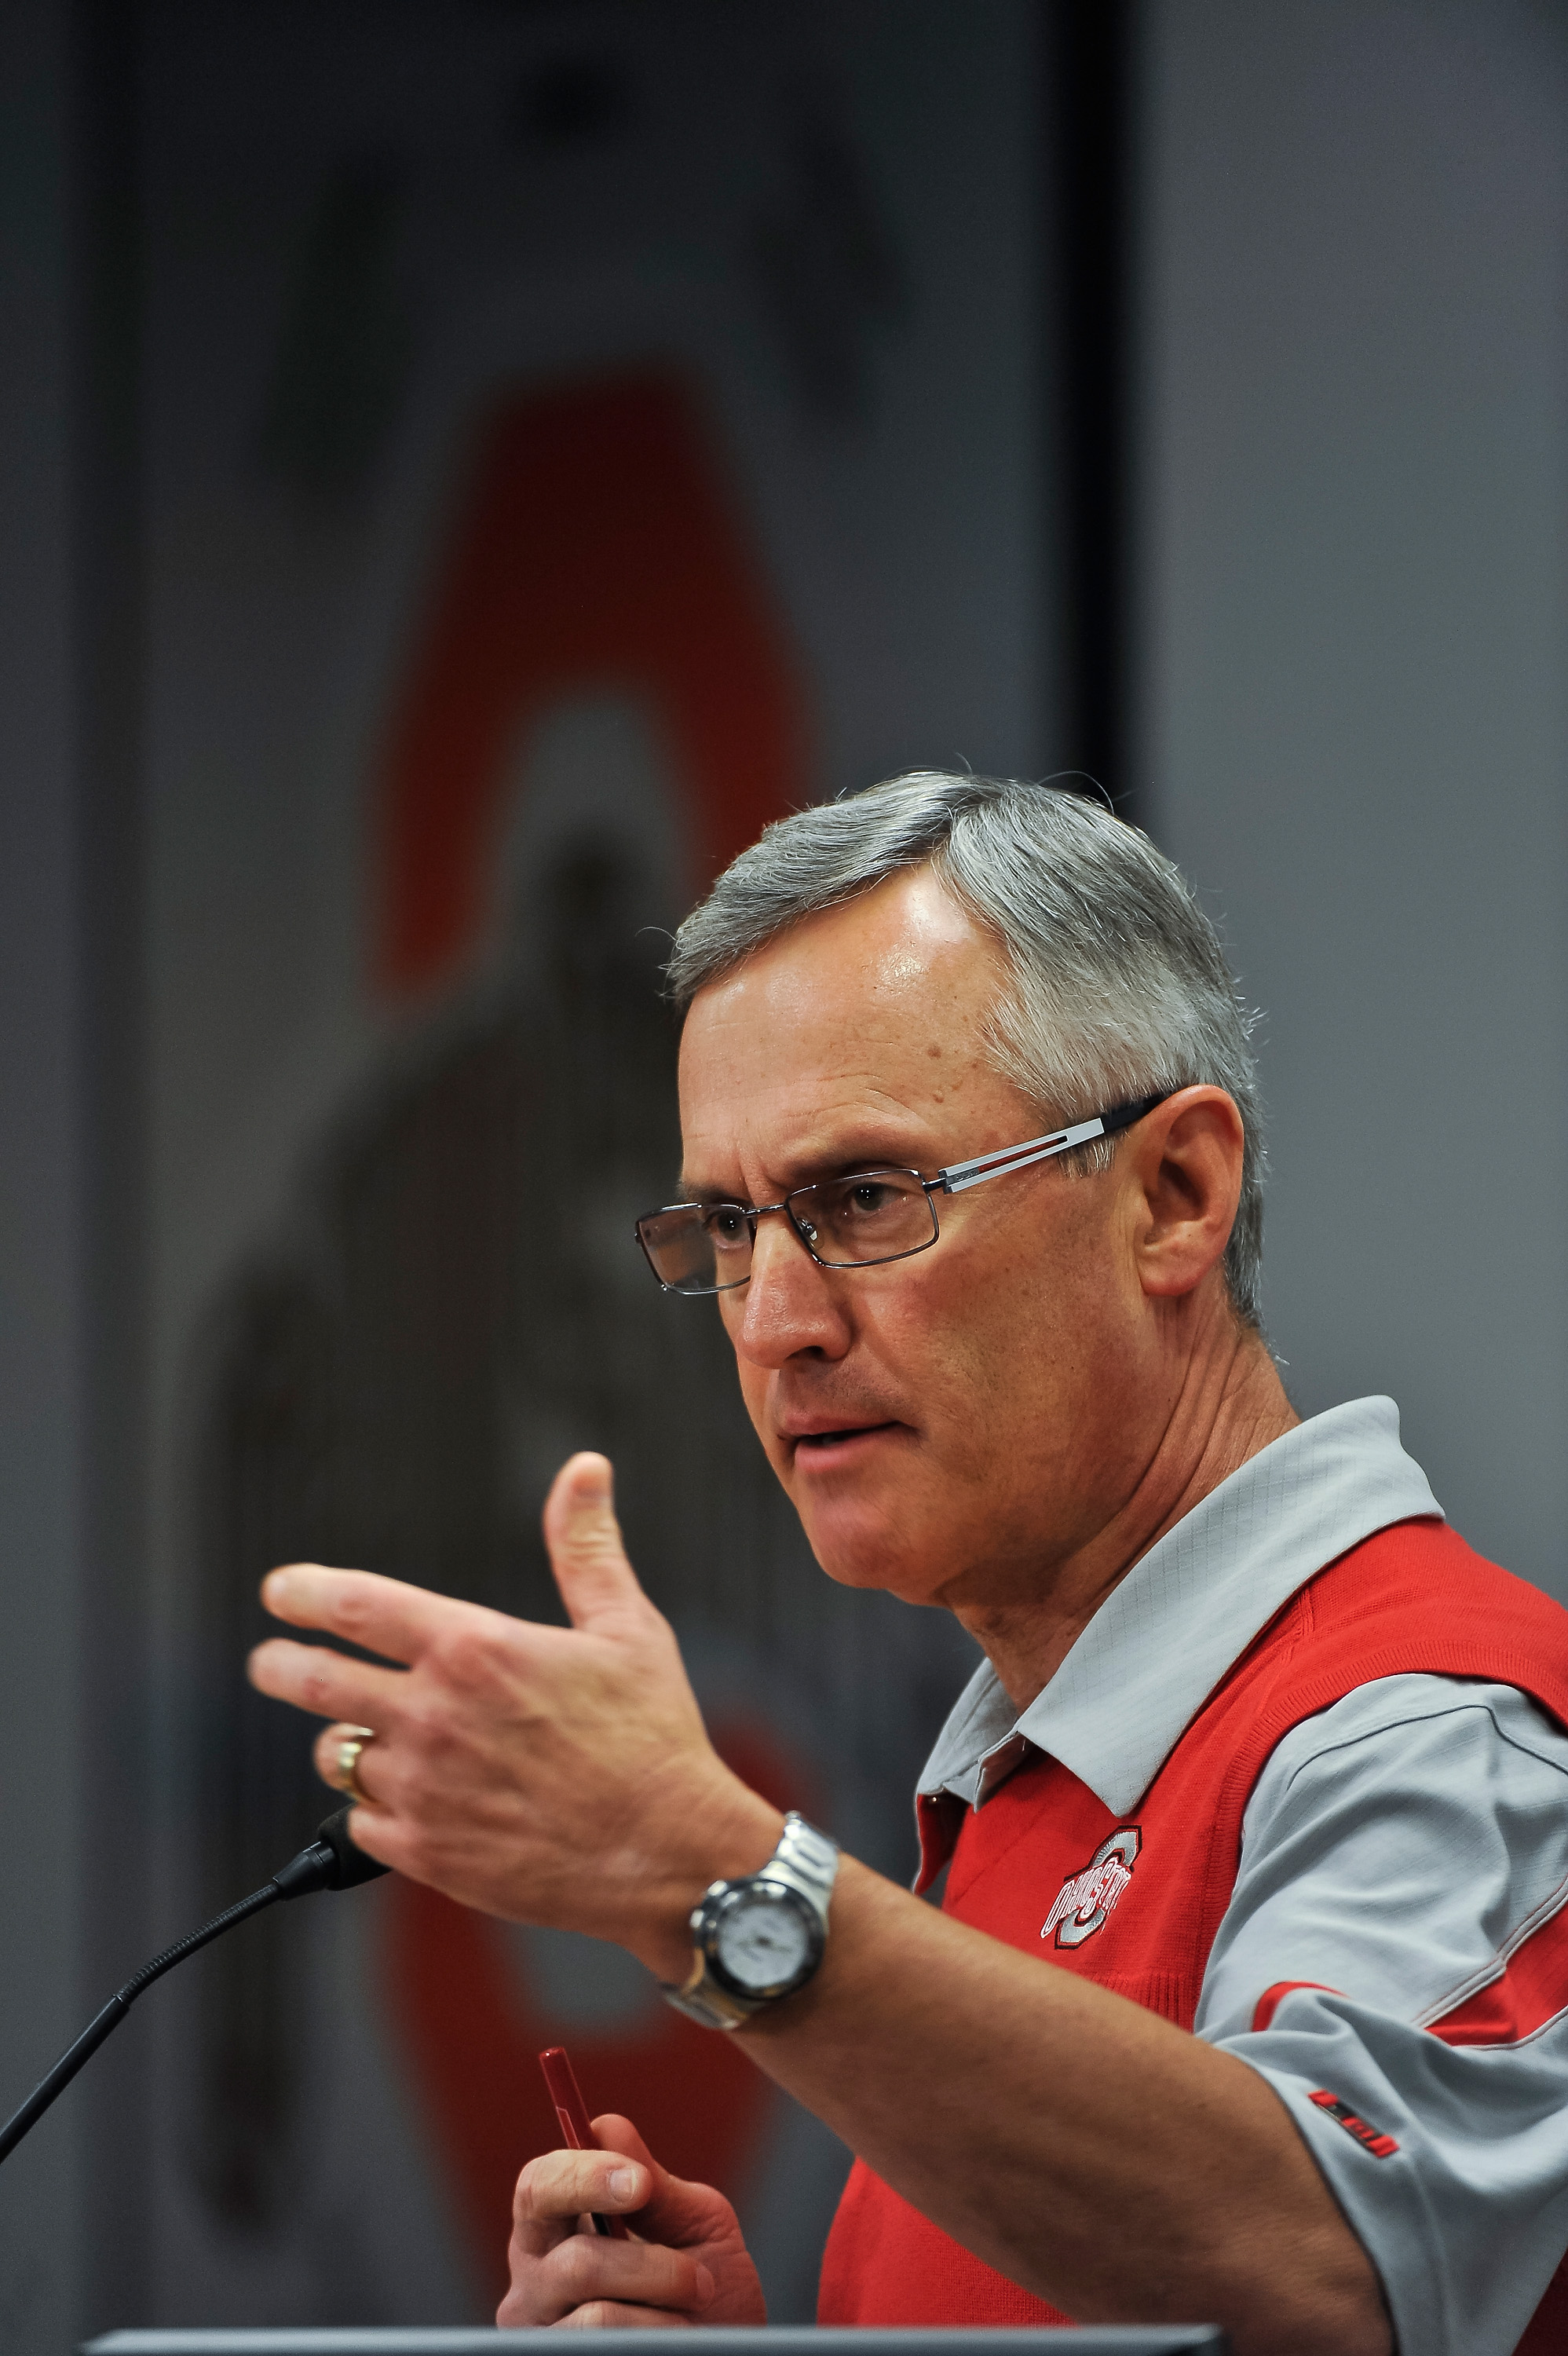 COLUMBUS, OH - MARCH 30:  Head Coach Jim Tressel speaks to the media during a press conference before the start of Spring practices at the Woody Hayes Athletic Center at The Ohio State University on March 30, 2011 in Columbus, Ohio. (Photo by Jamie Sabau/